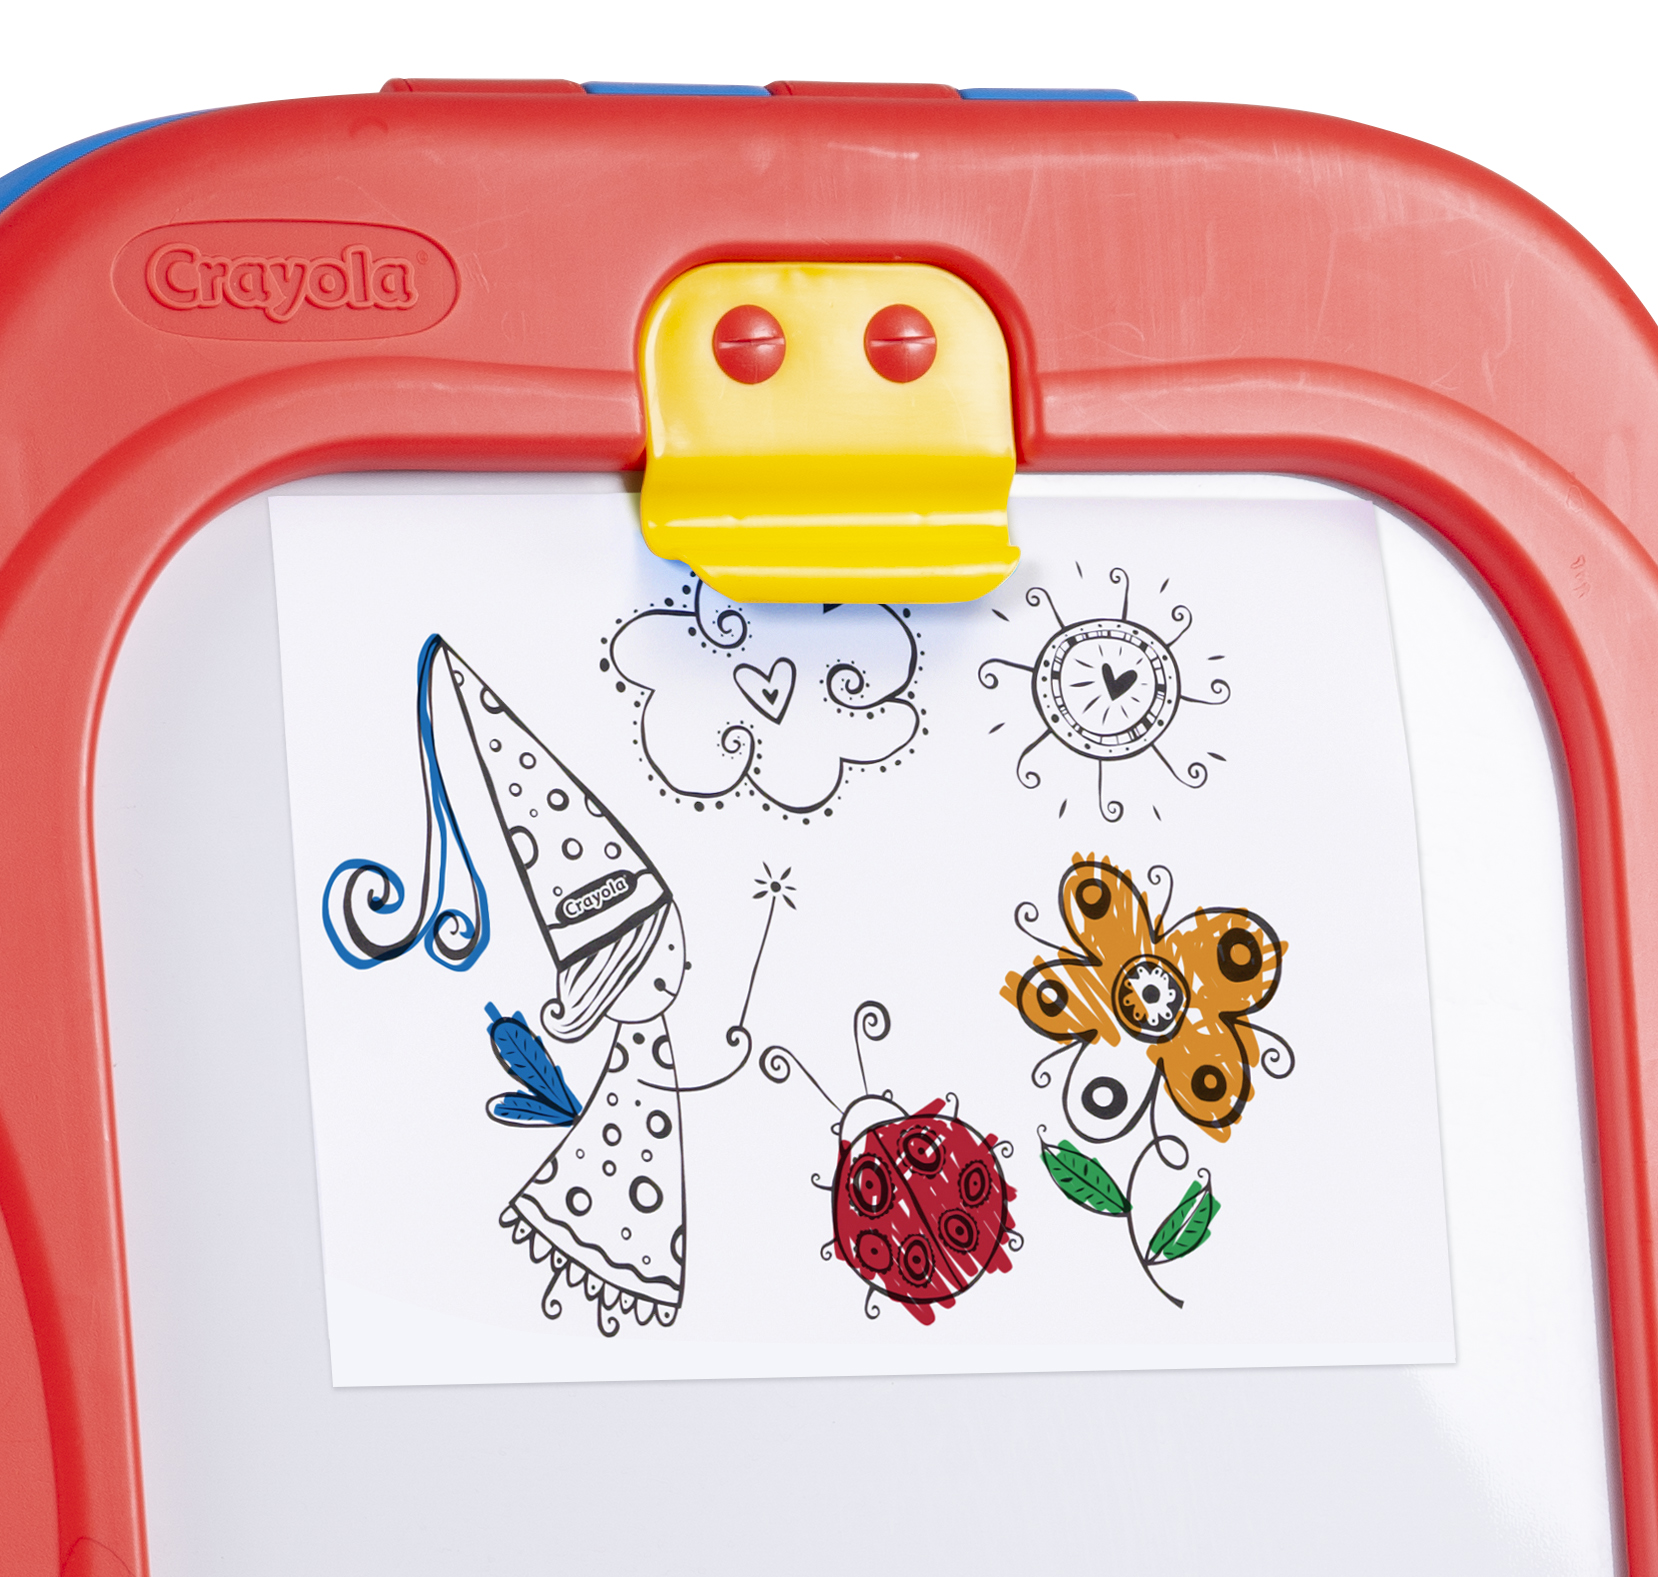 Crayola 3-in-1 Double Easel with Magnetic Letters (Blue, Red) - image 3 of 4